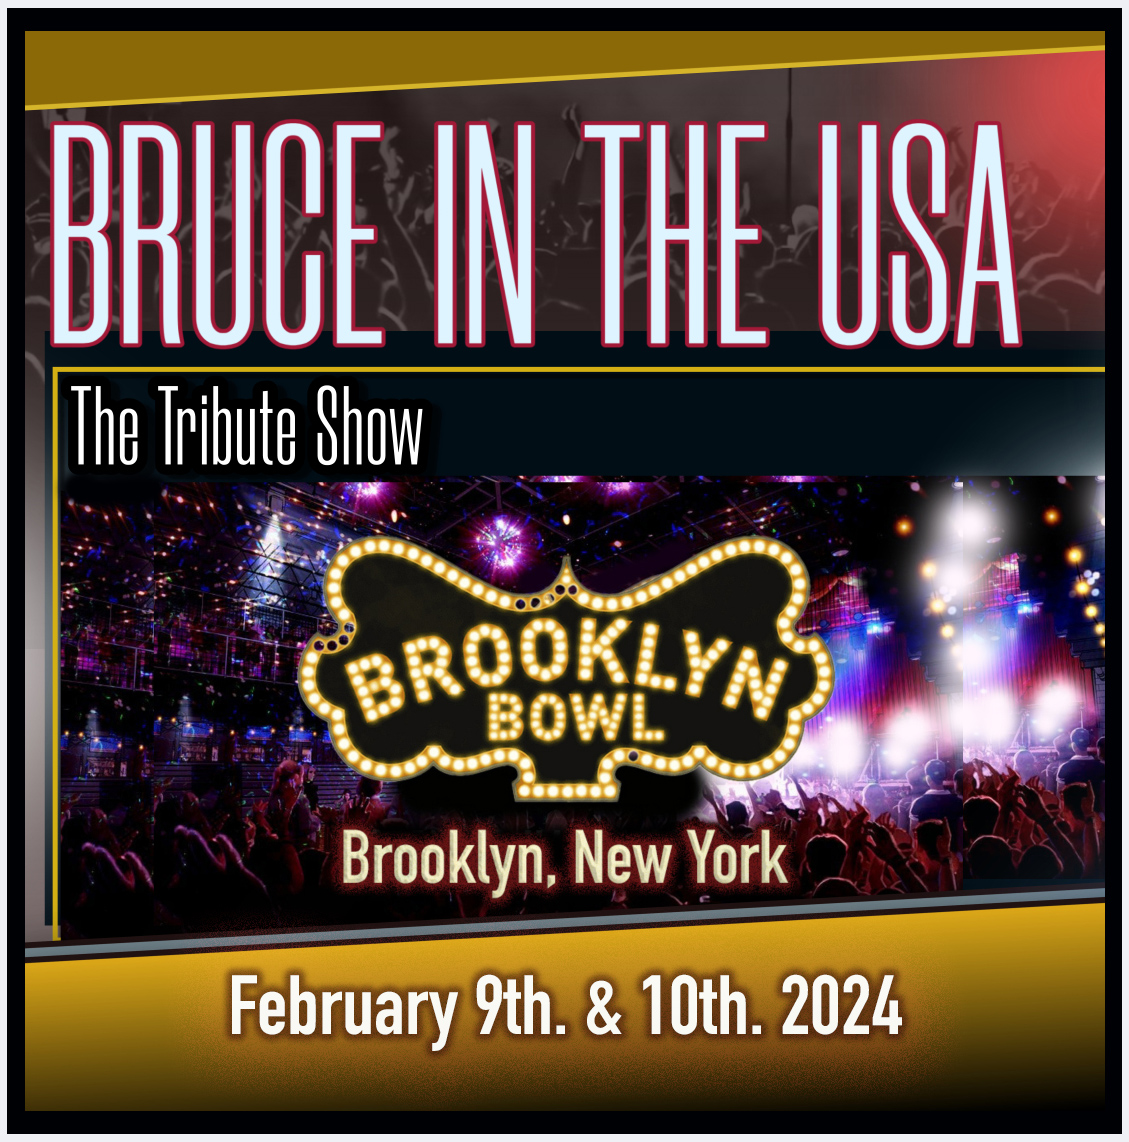 BRUCE IN THE USA - The Bruce Springsteen Tribute Show will be performing at BROOKLYN BOWL, Brooklyn, New York. 2 nights - Friday & Saturday - February 9th. & 10th., 2024. Find out more... brooklynbowl.com/brooklyn